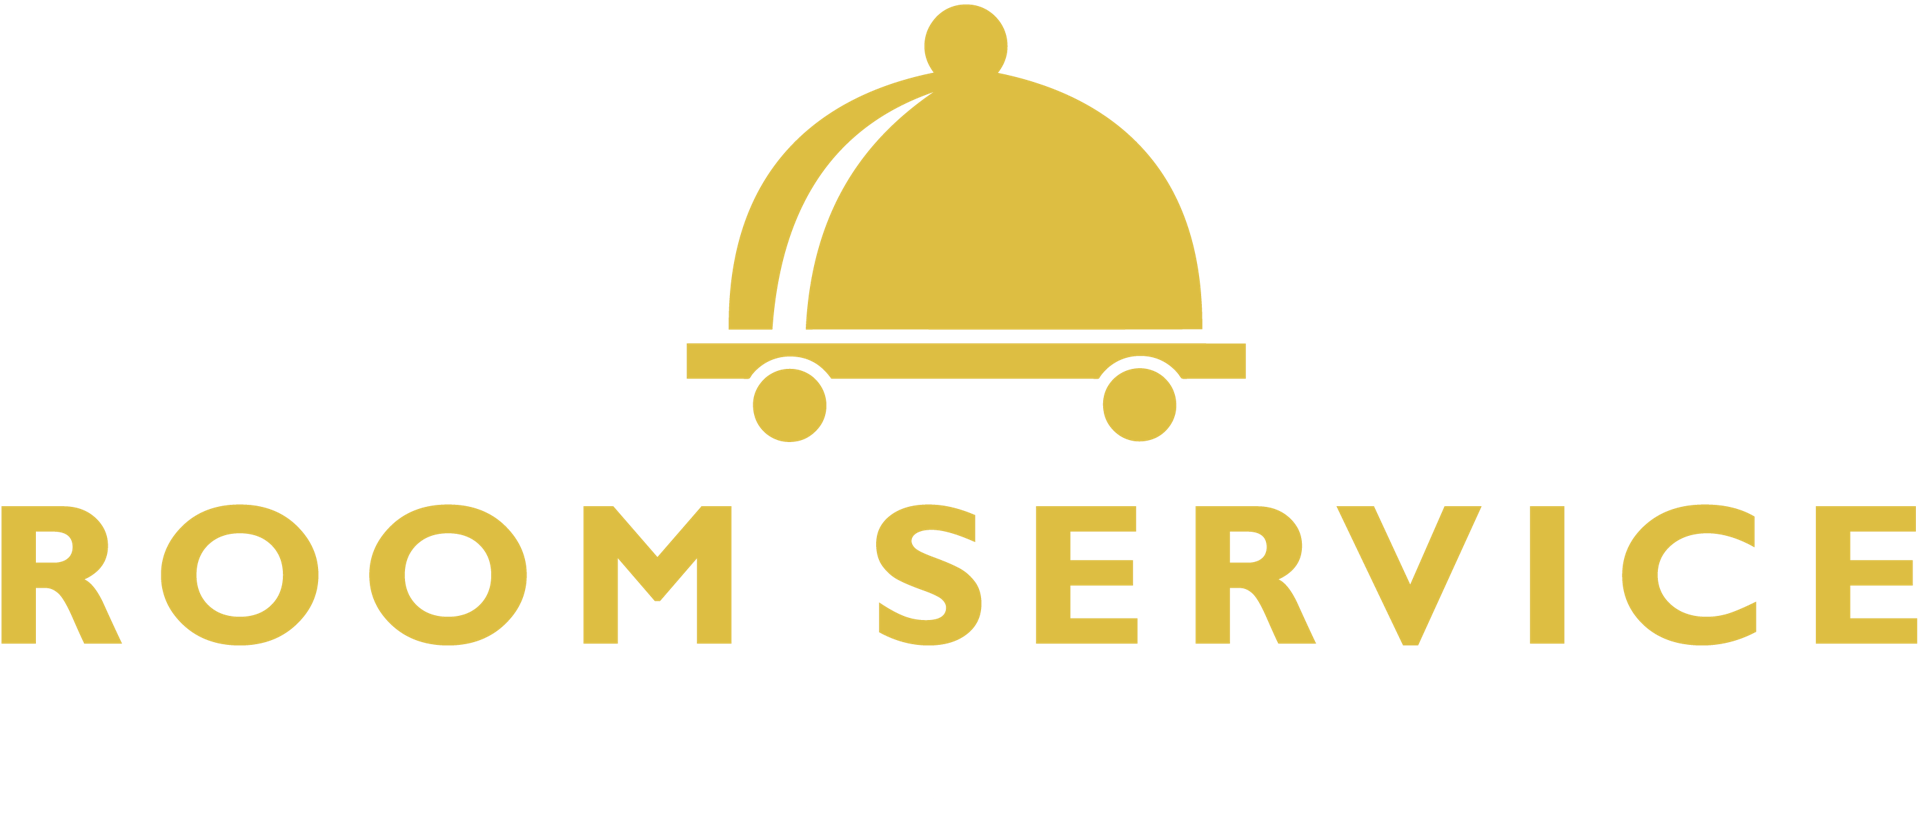 Room Service - Hotel Food Delivery